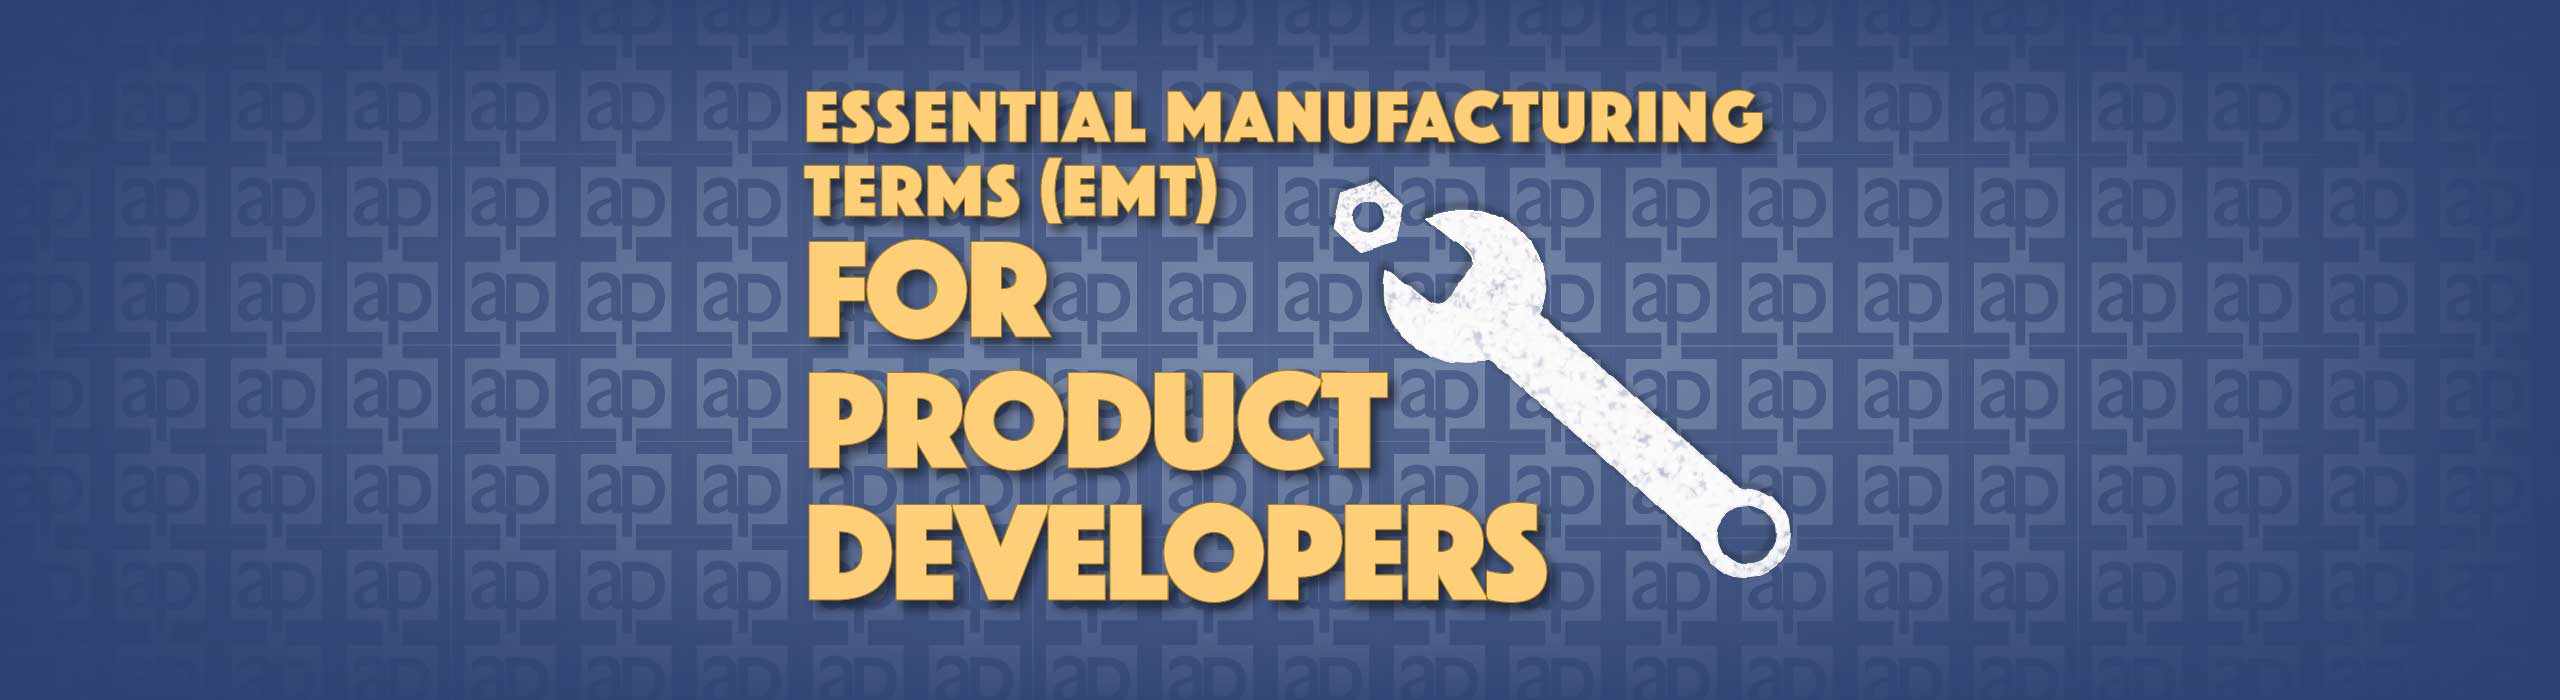 Manufacturing Terms for Product Developers